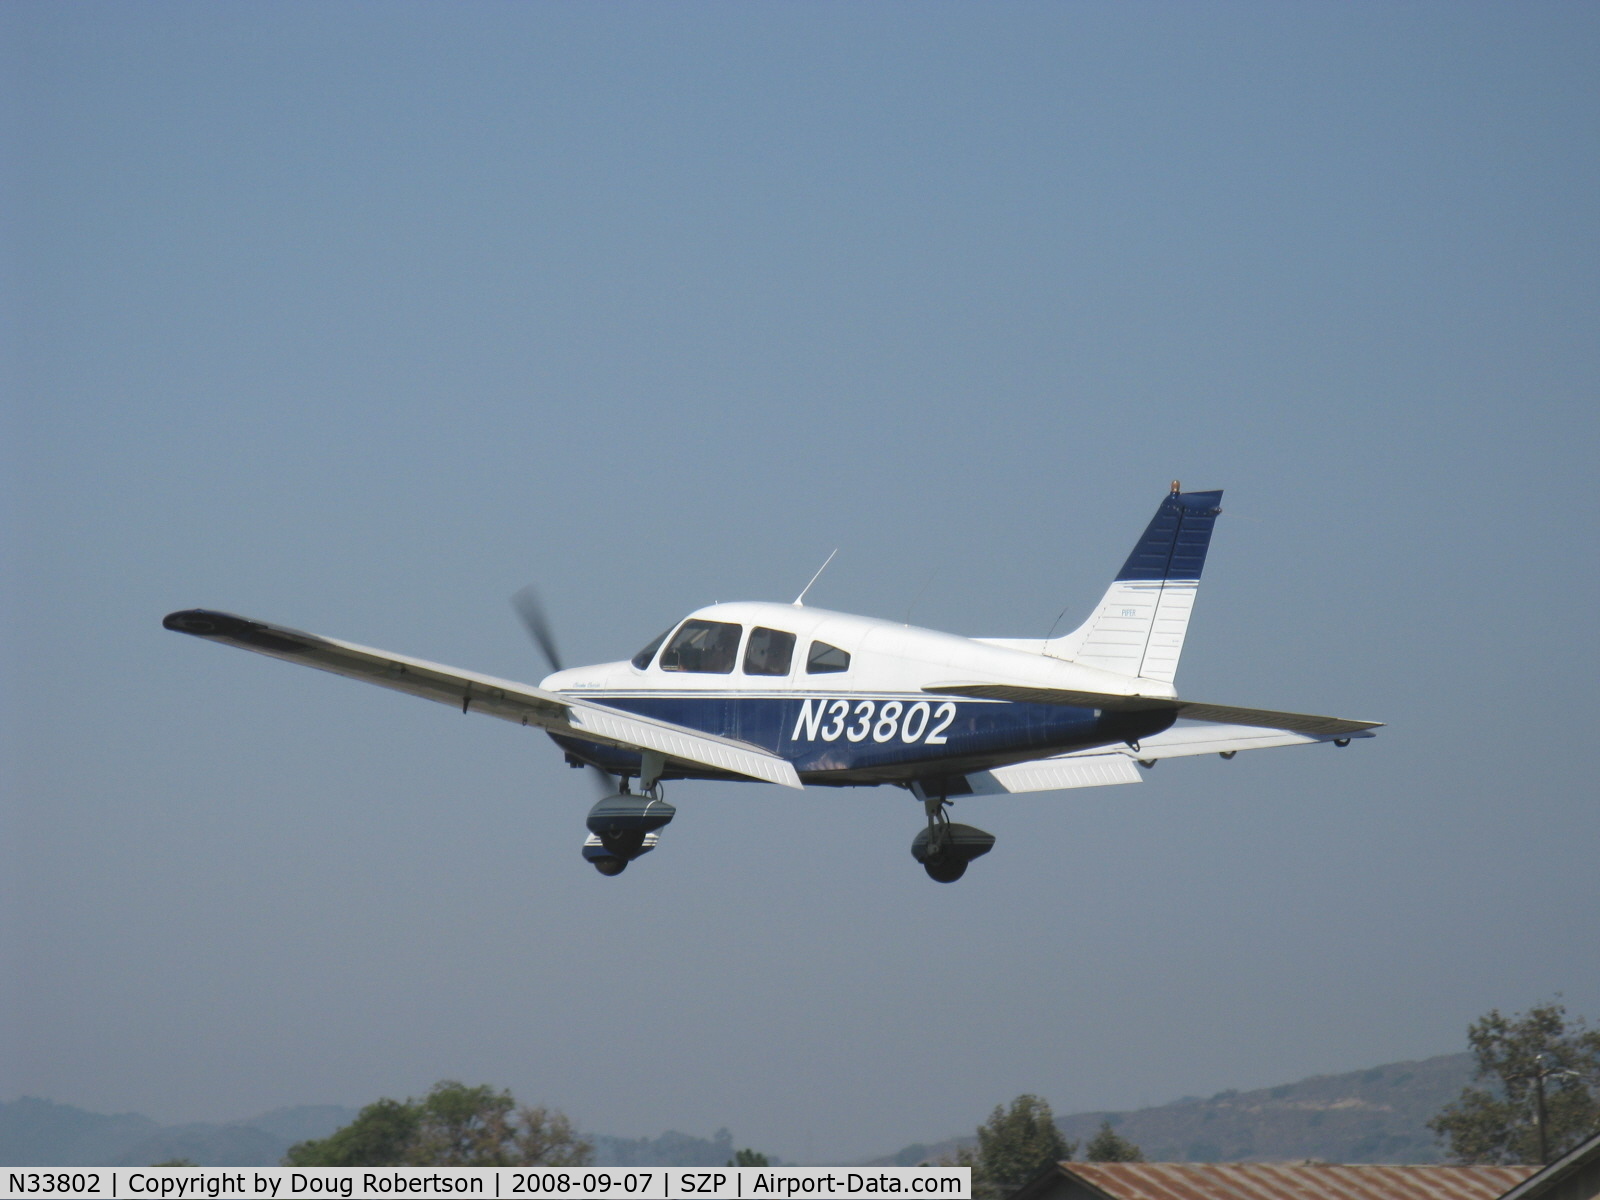 N33802, 1975 Piper PA-28-151 C/N 28-7515364, 1975 Piper PA-28-151 WARRIOR, Lycoming O-320-E3D 150 Hp, go-around overflight Rwy 22